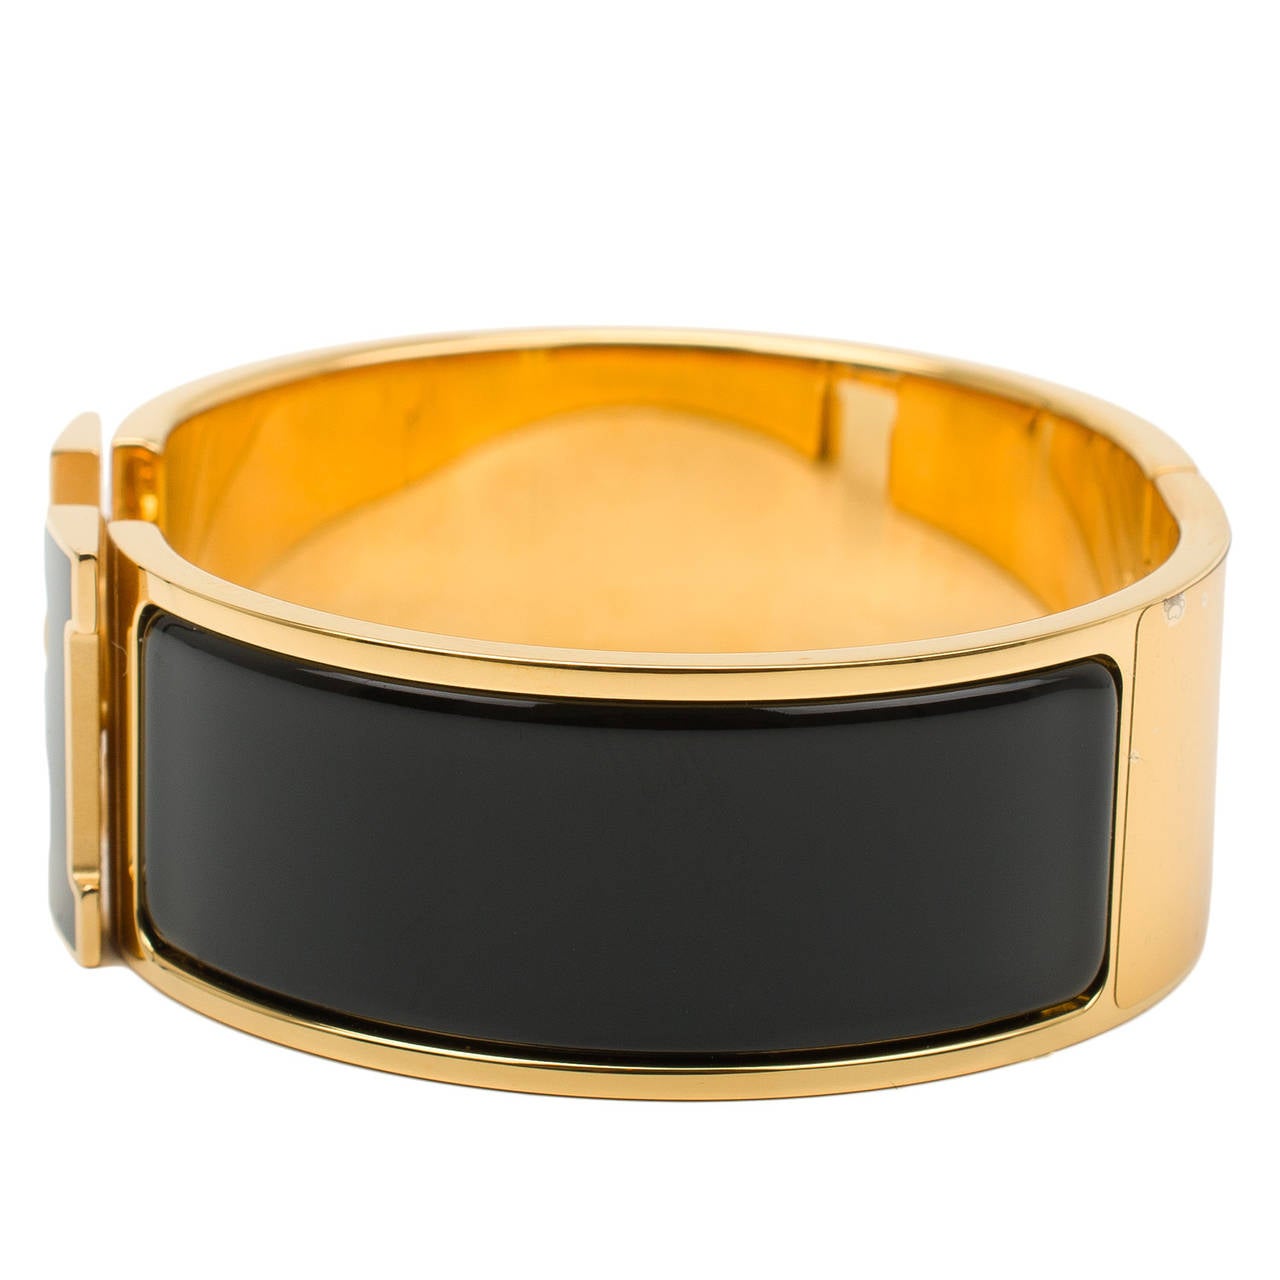 Hermes wide Clic Clac H bracelet in Black enamel with Black enamel H and gold plated hardware in size GM.

Hermes is renowned for its enamel and leather bracelets. Hermes printed enamel bangles, enamel Clic Clac H bracelets, and leather/exotic